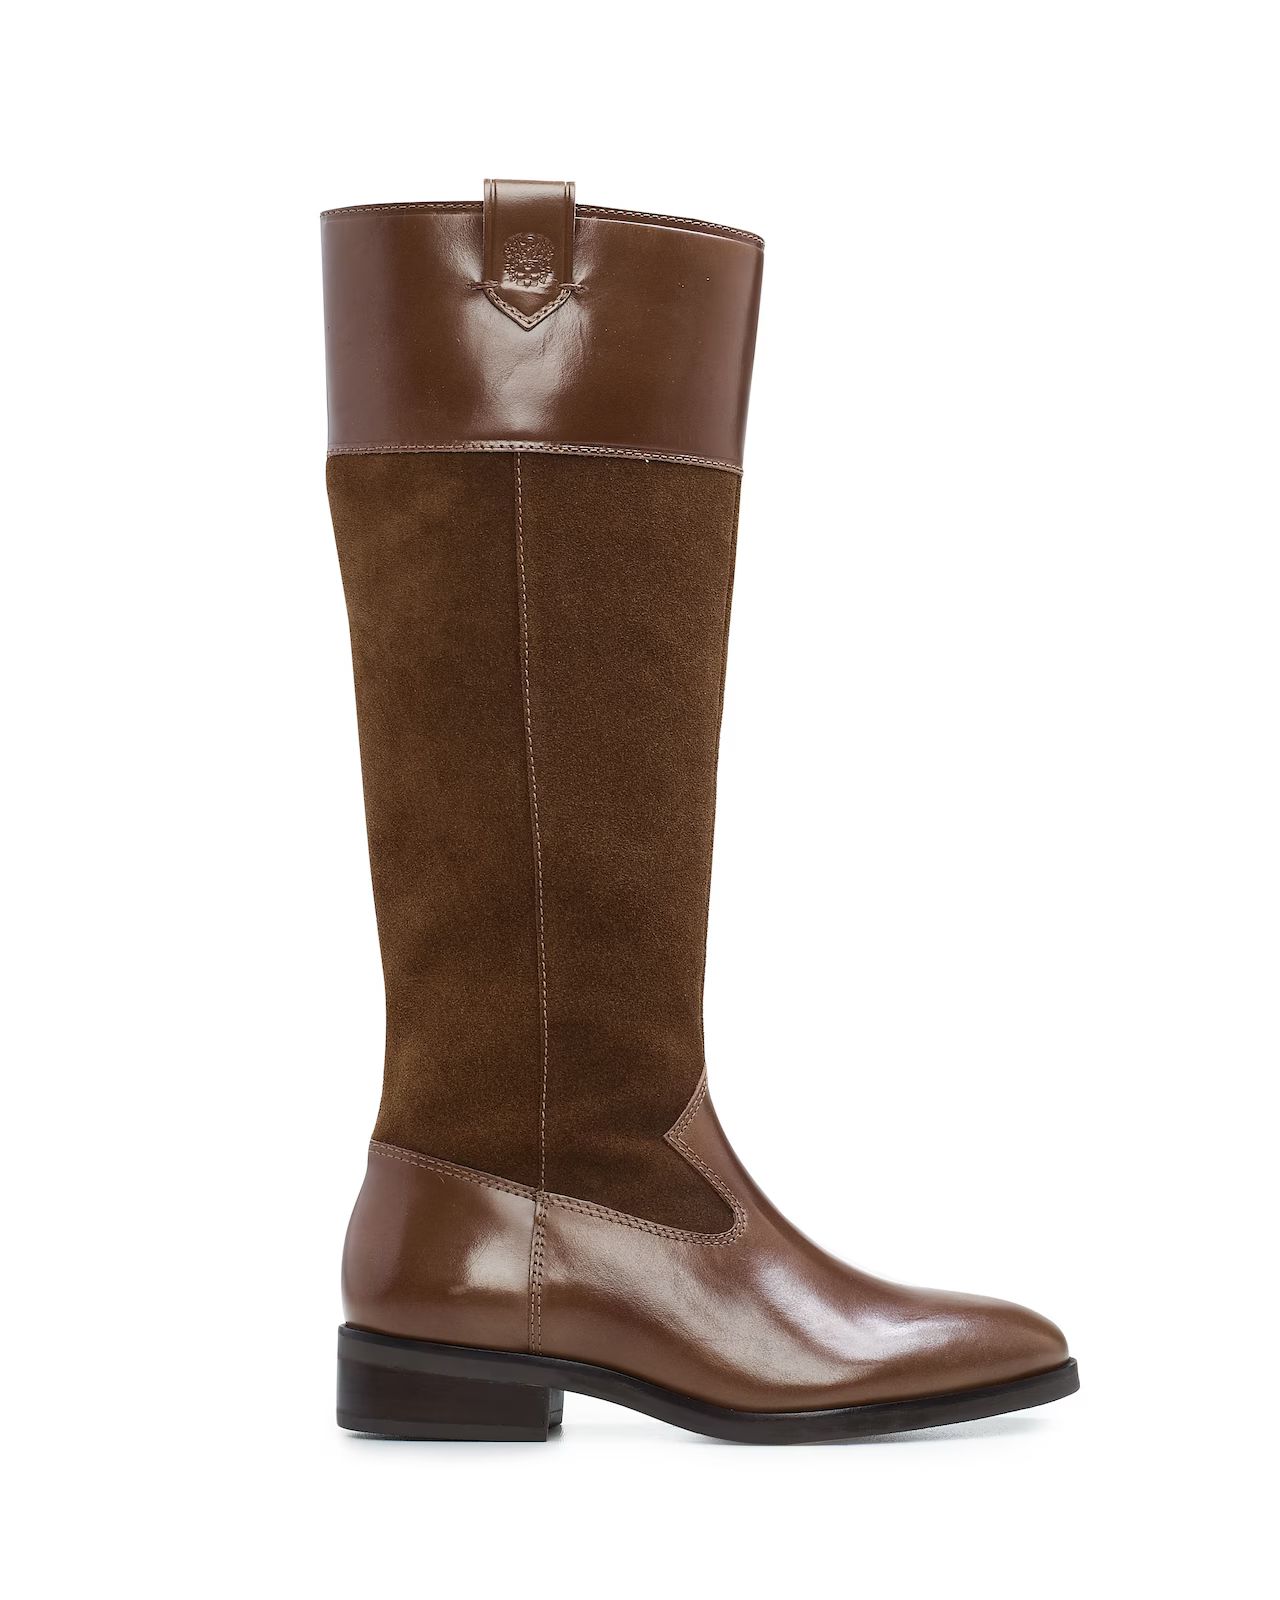 Vince Camuto Selpisa Boot | Vince Camuto